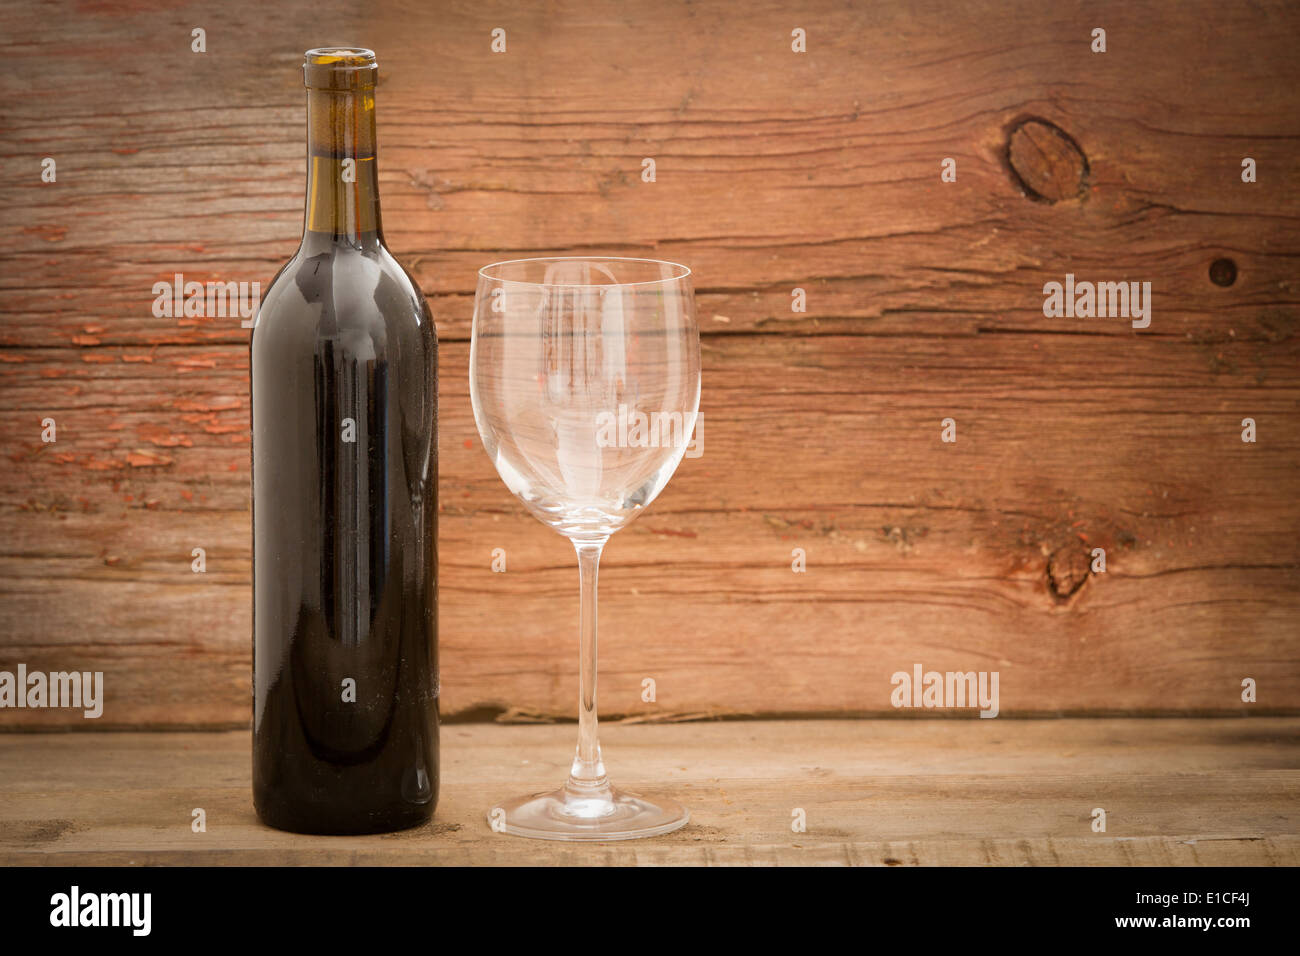 Wine bottle with the label removed standing alongside an elegant wineglass against rustic wooden boards with copy space Stock Photo